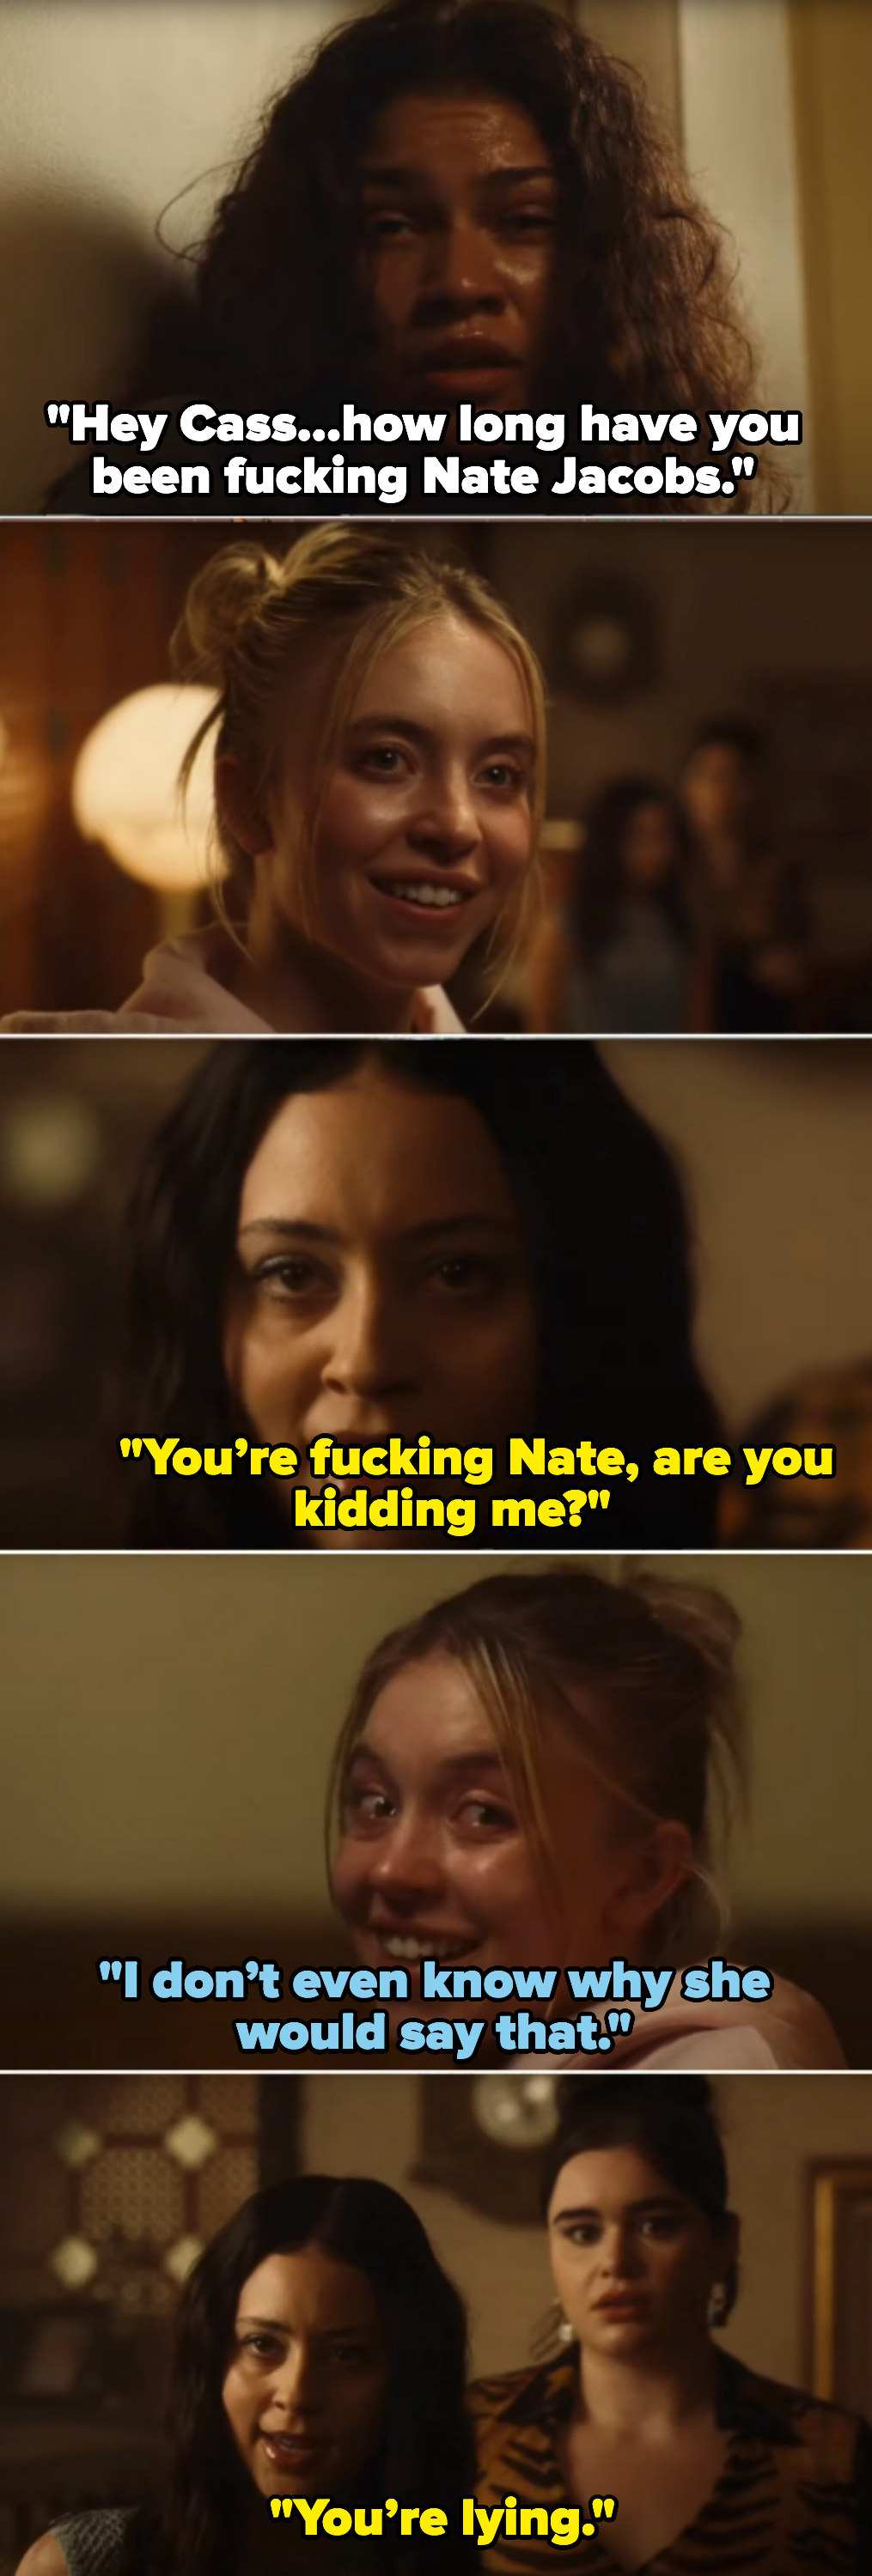 Rue asks Cassie, &quot;How long have you been fucking Nate Jacobs?&quot; and she replies &quot;I don&#x27;t even know why she would say that&quot; and Maddy says &quot;You&#x27;re lying&quot;